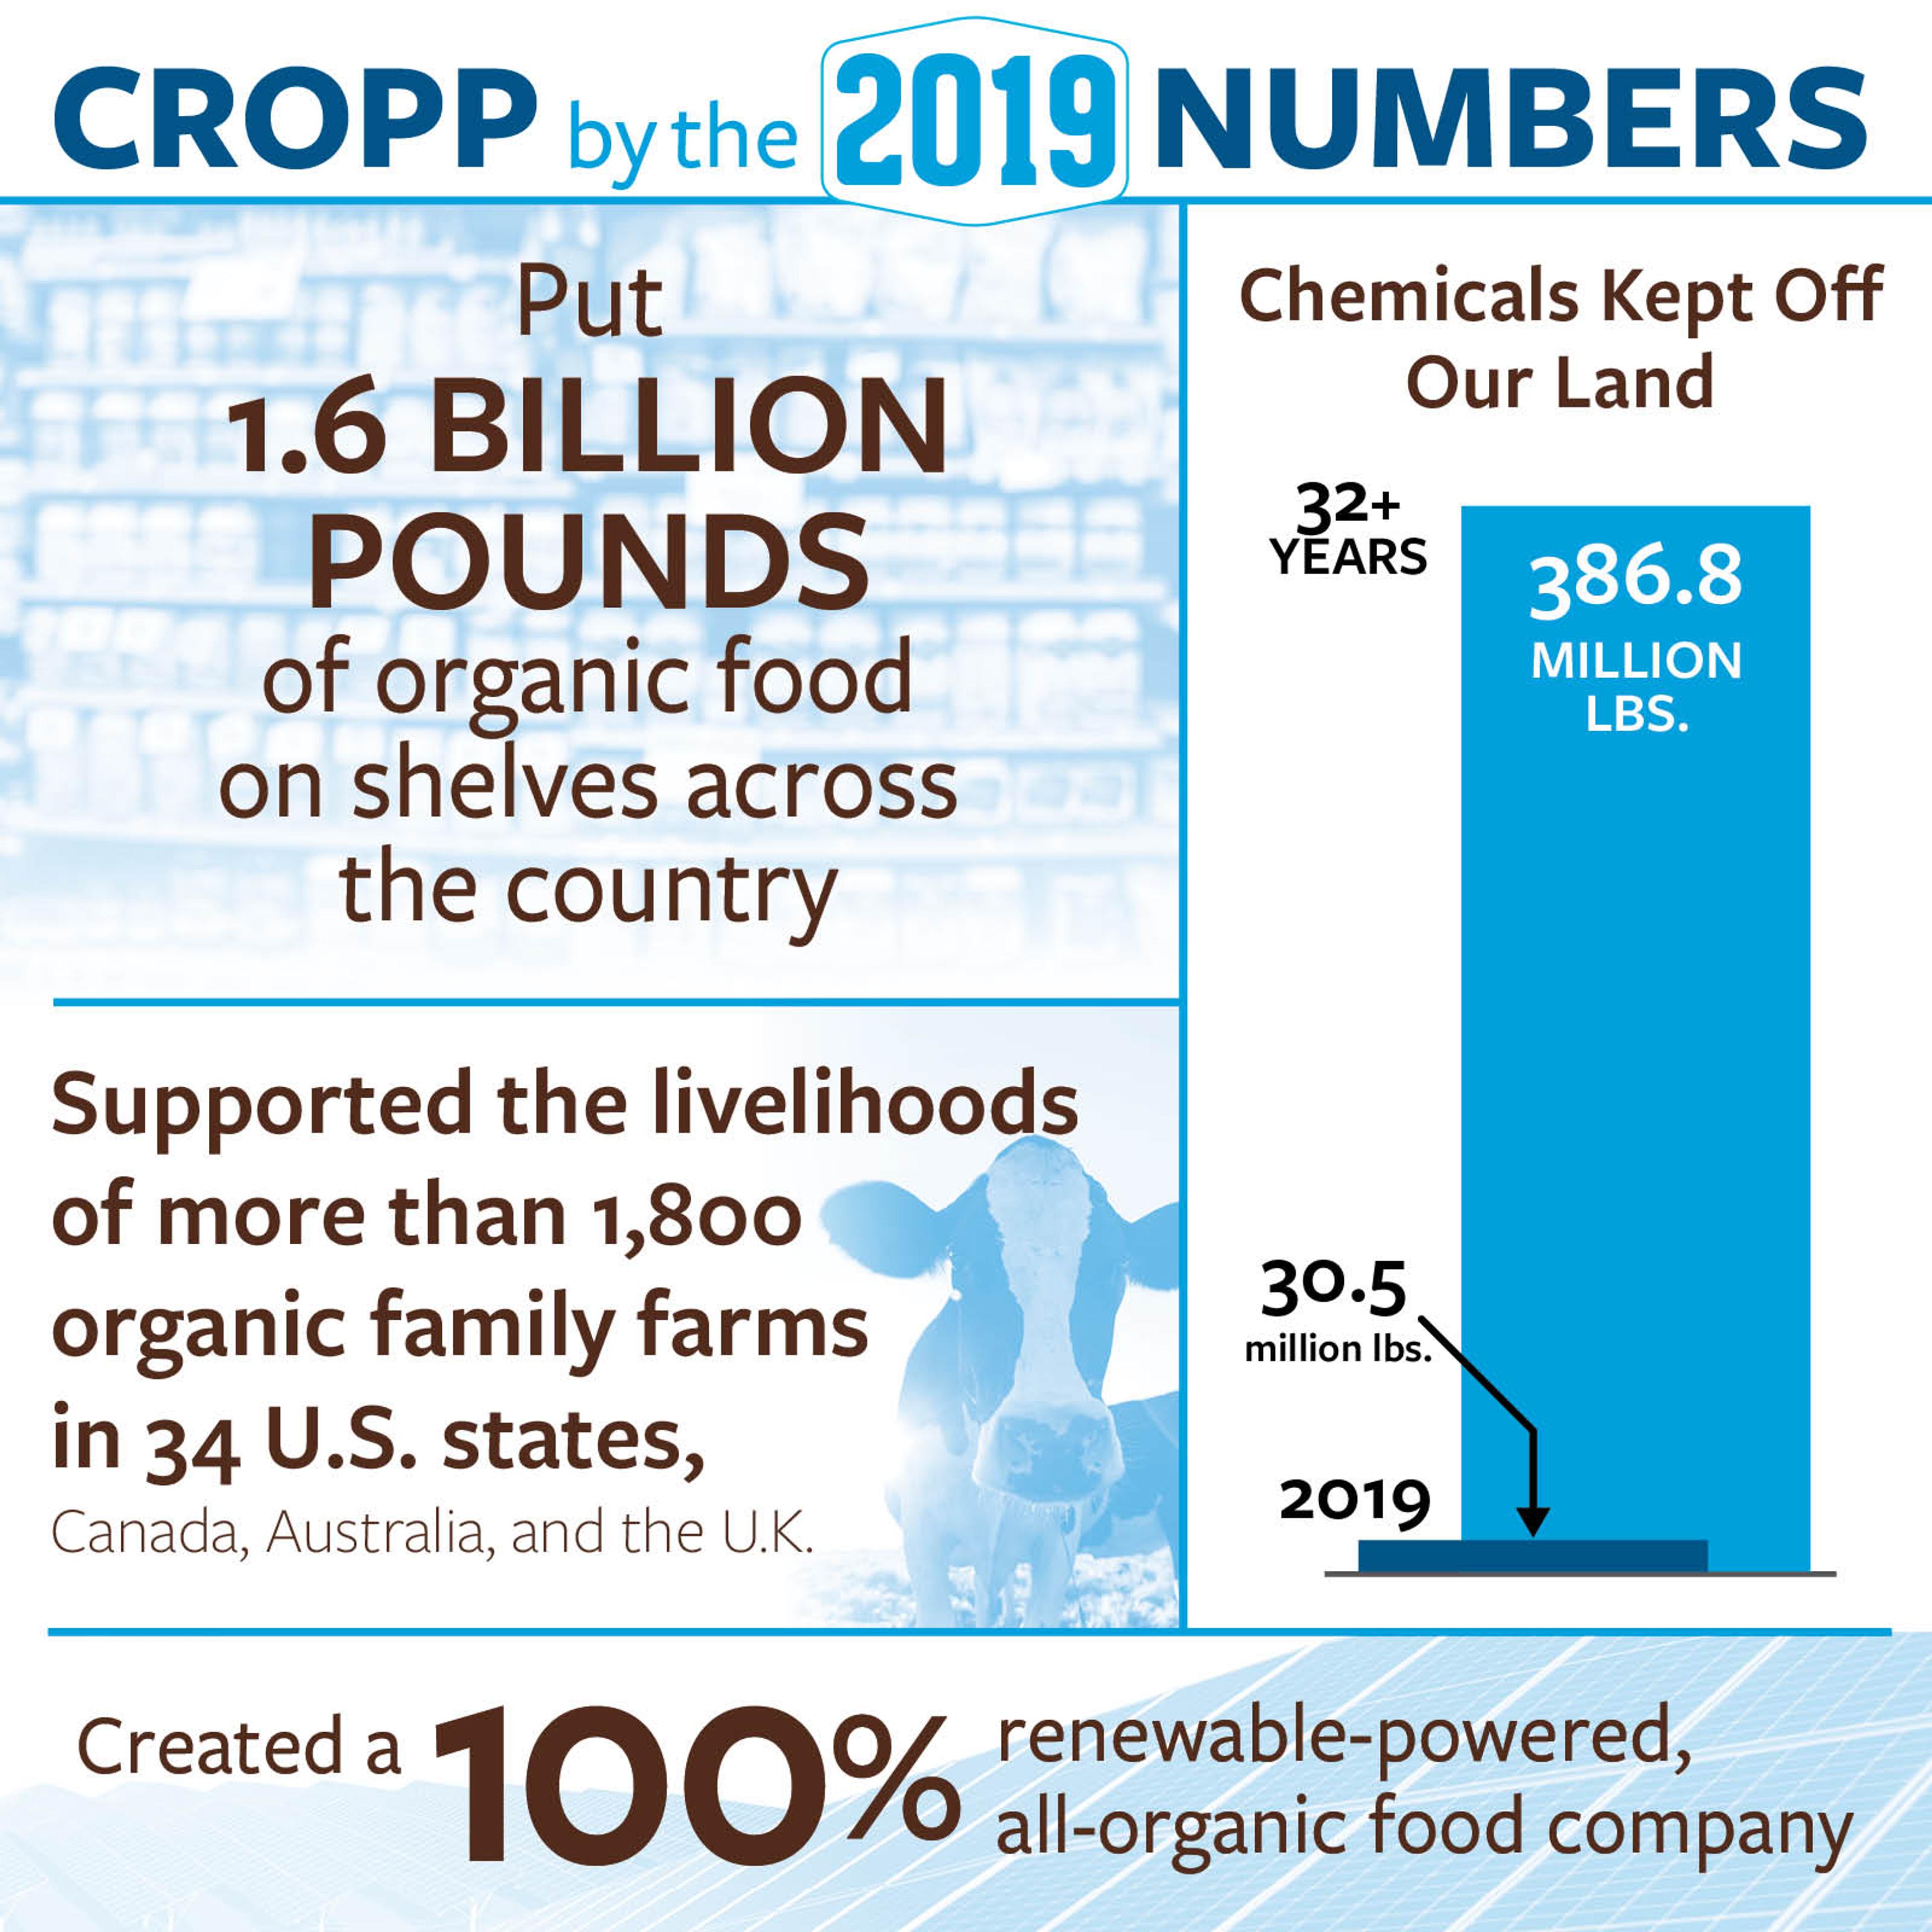 CROPP by the Numbers